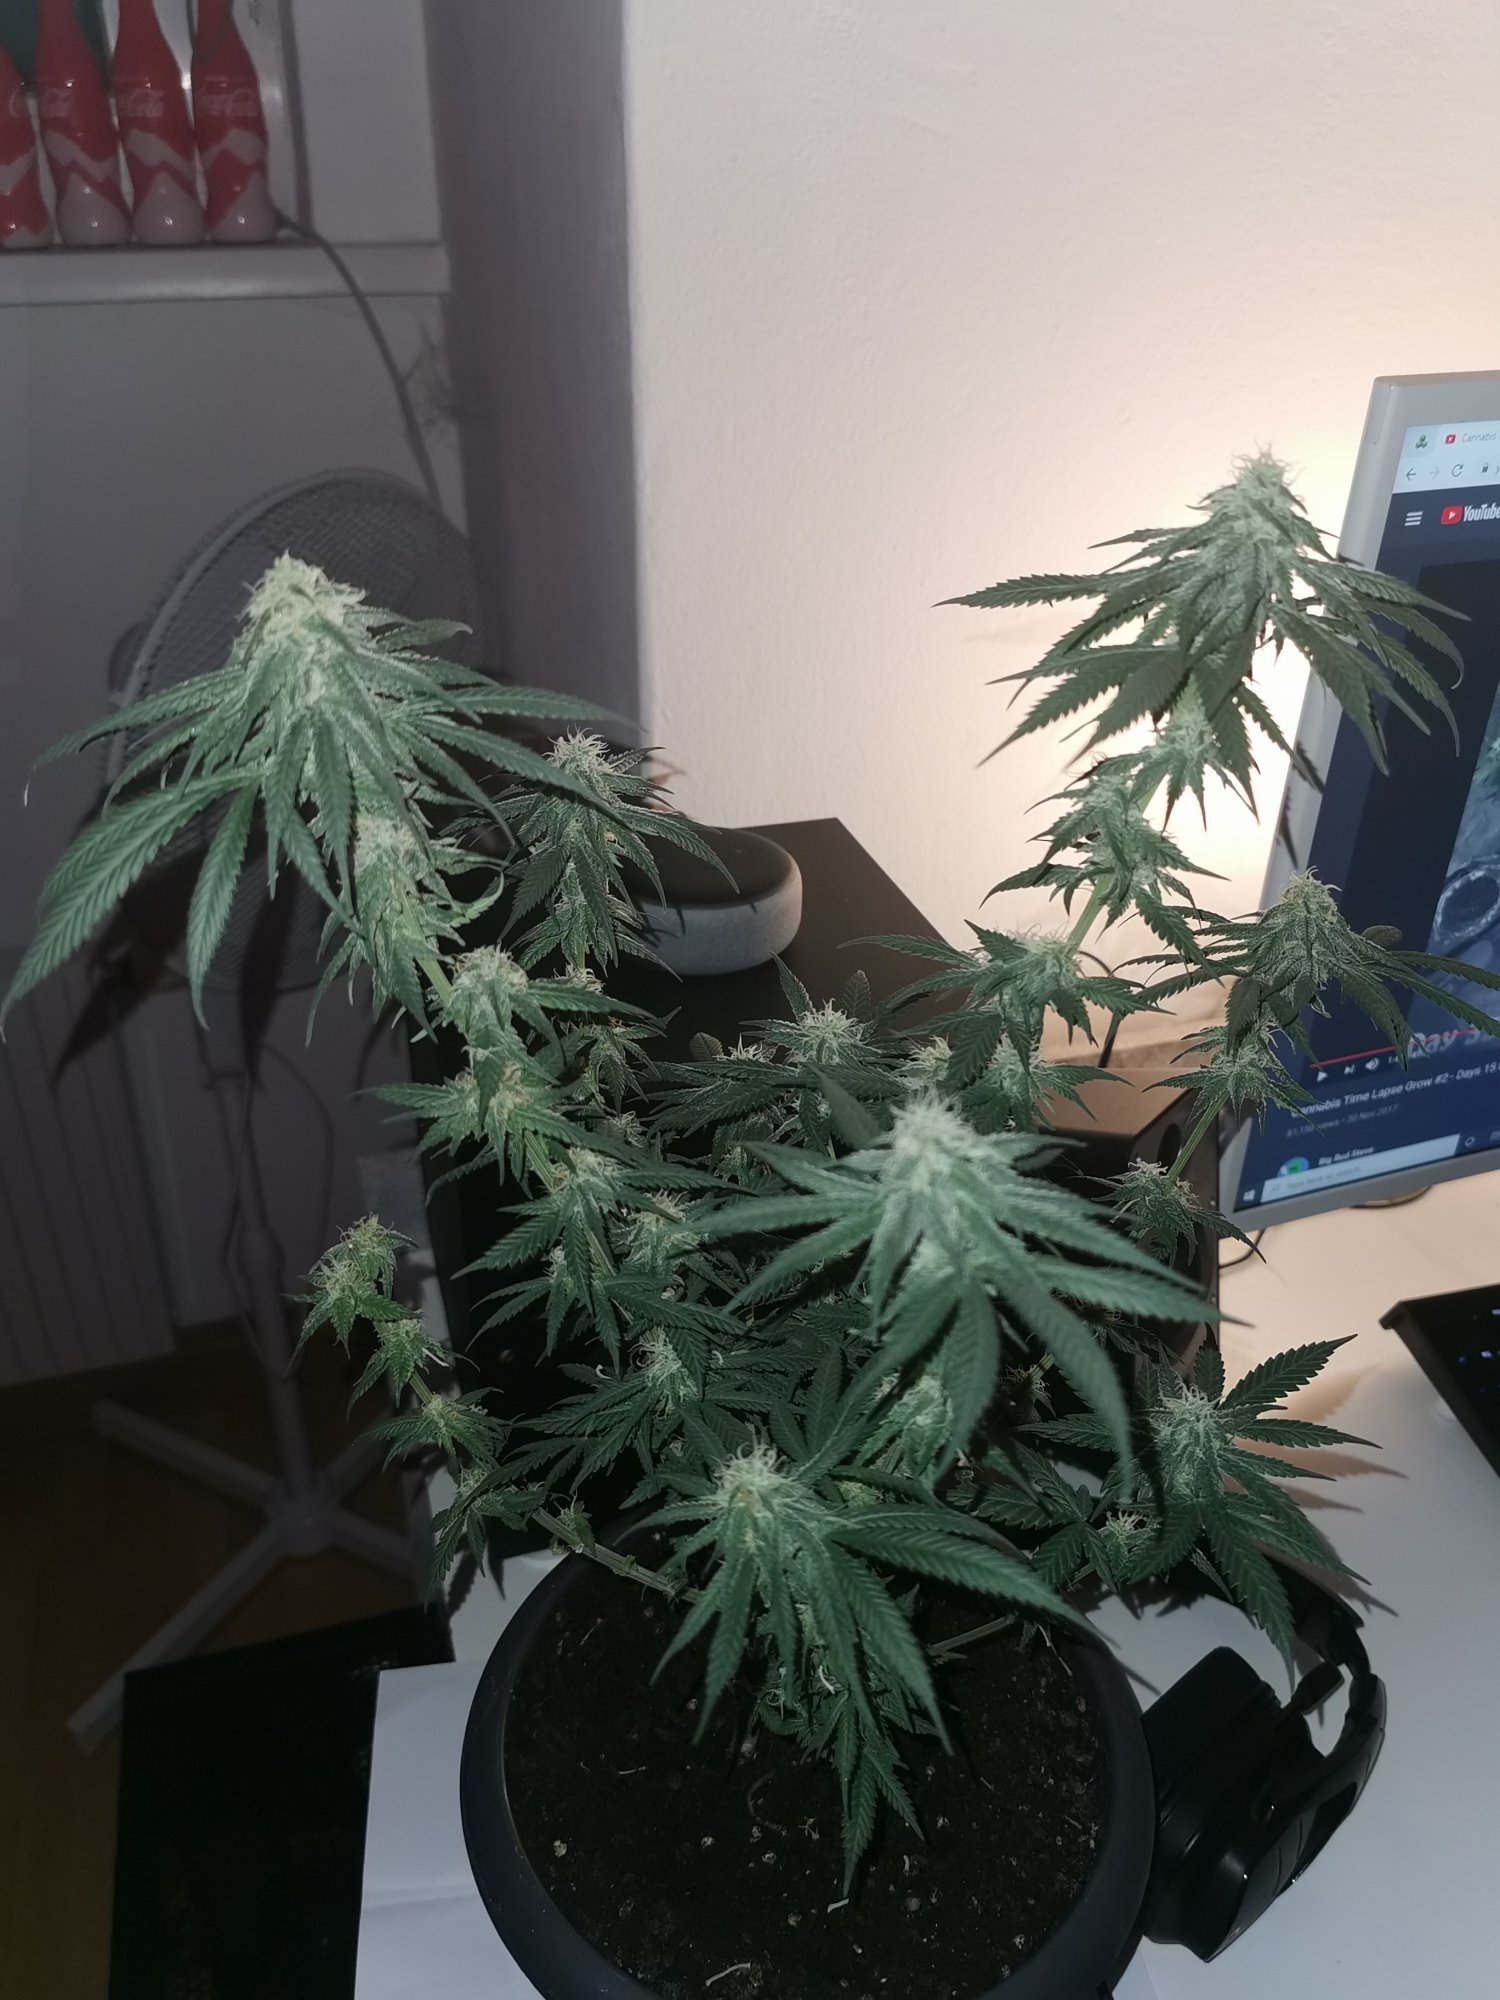 How is my plant and can you give estimated time of harvest